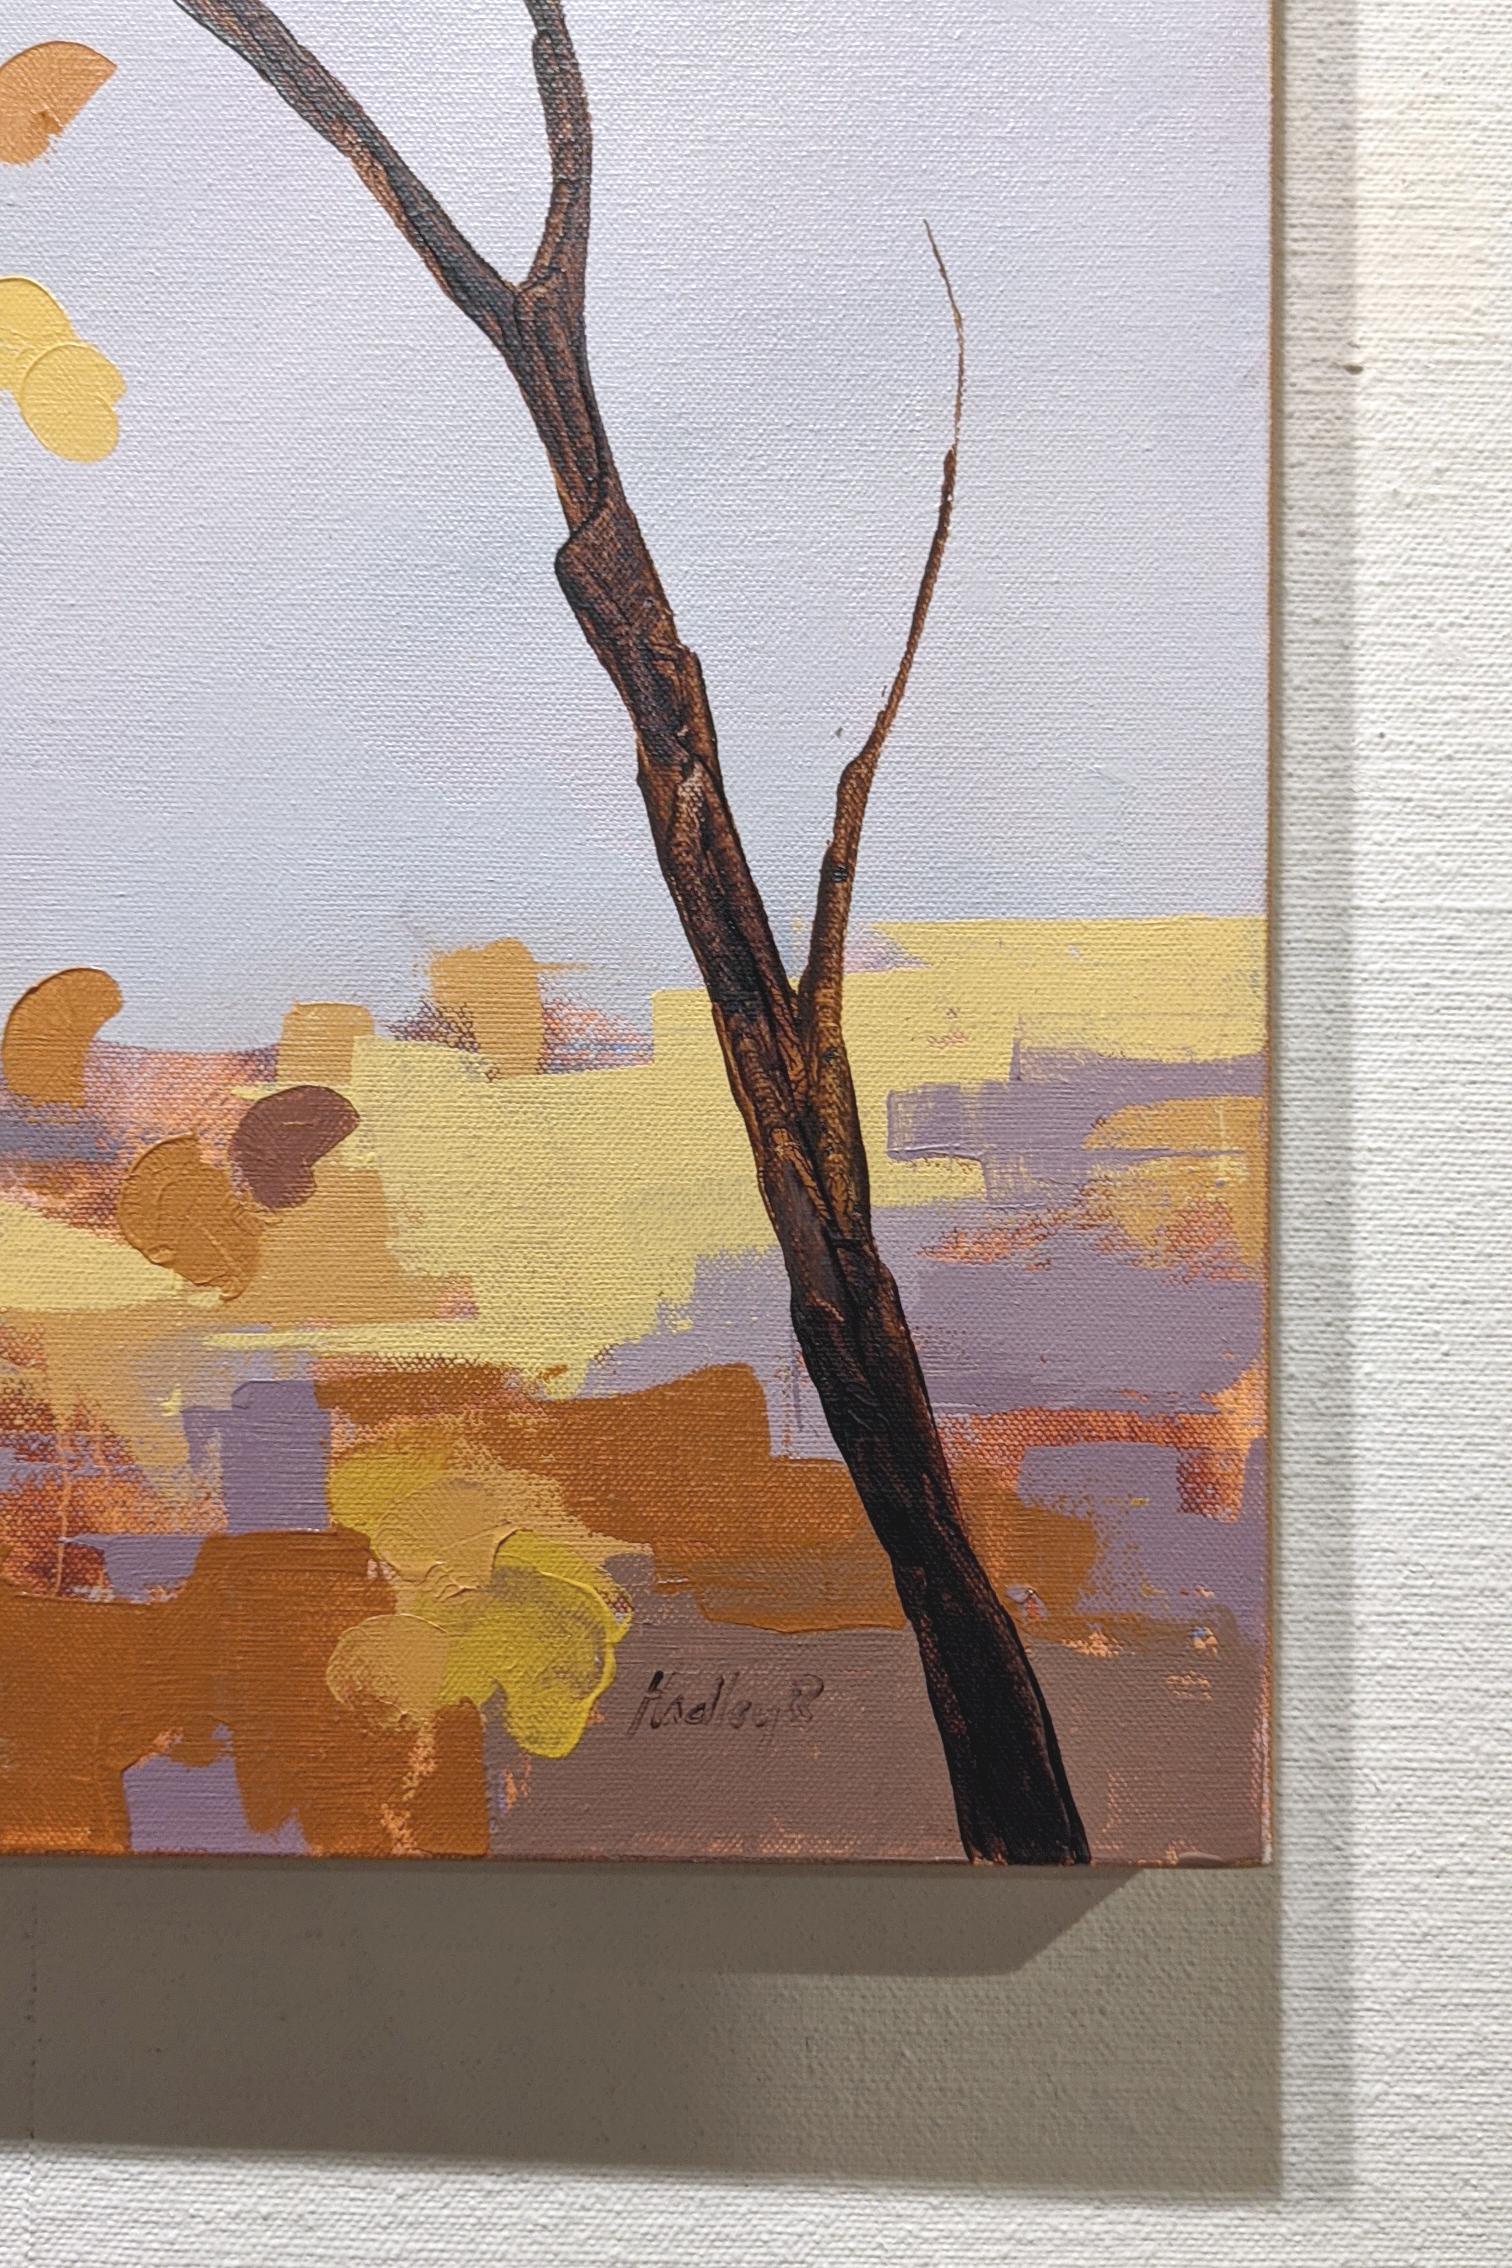 Those Last Leaves - Other Art Style Painting by Hadley Rampton